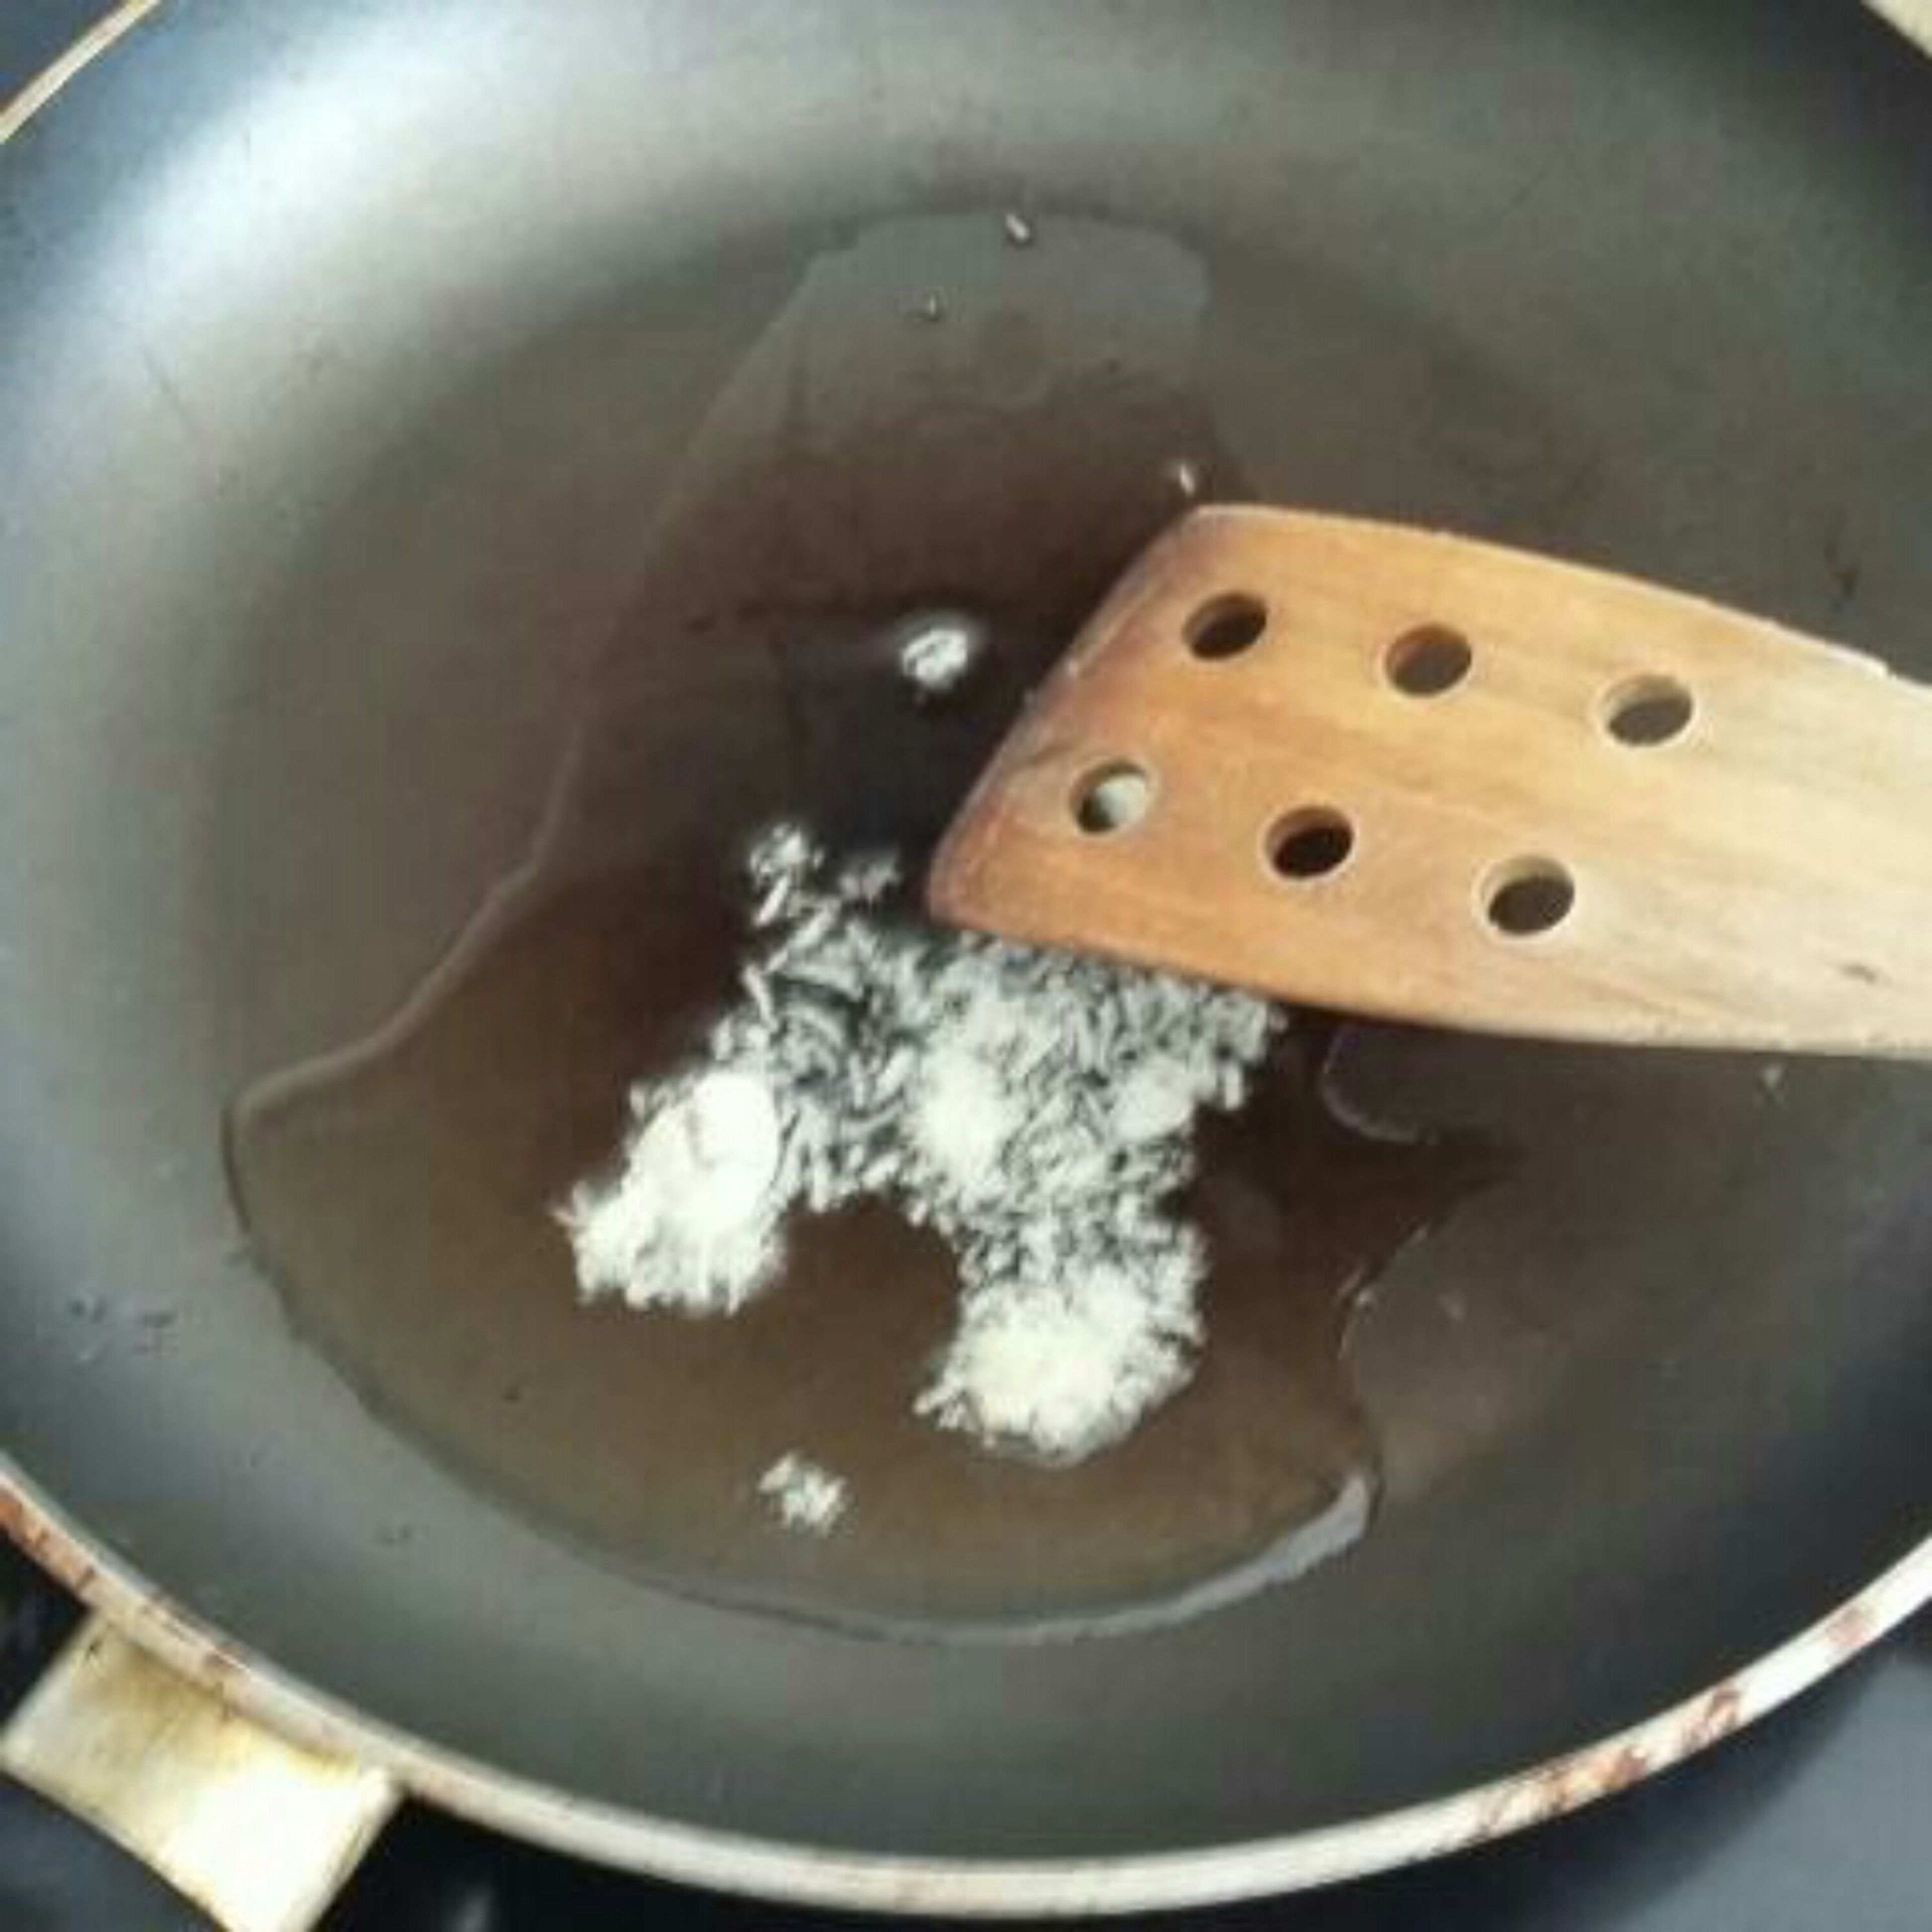 grate garlic into frying pan with cooking oil, stir until light brown